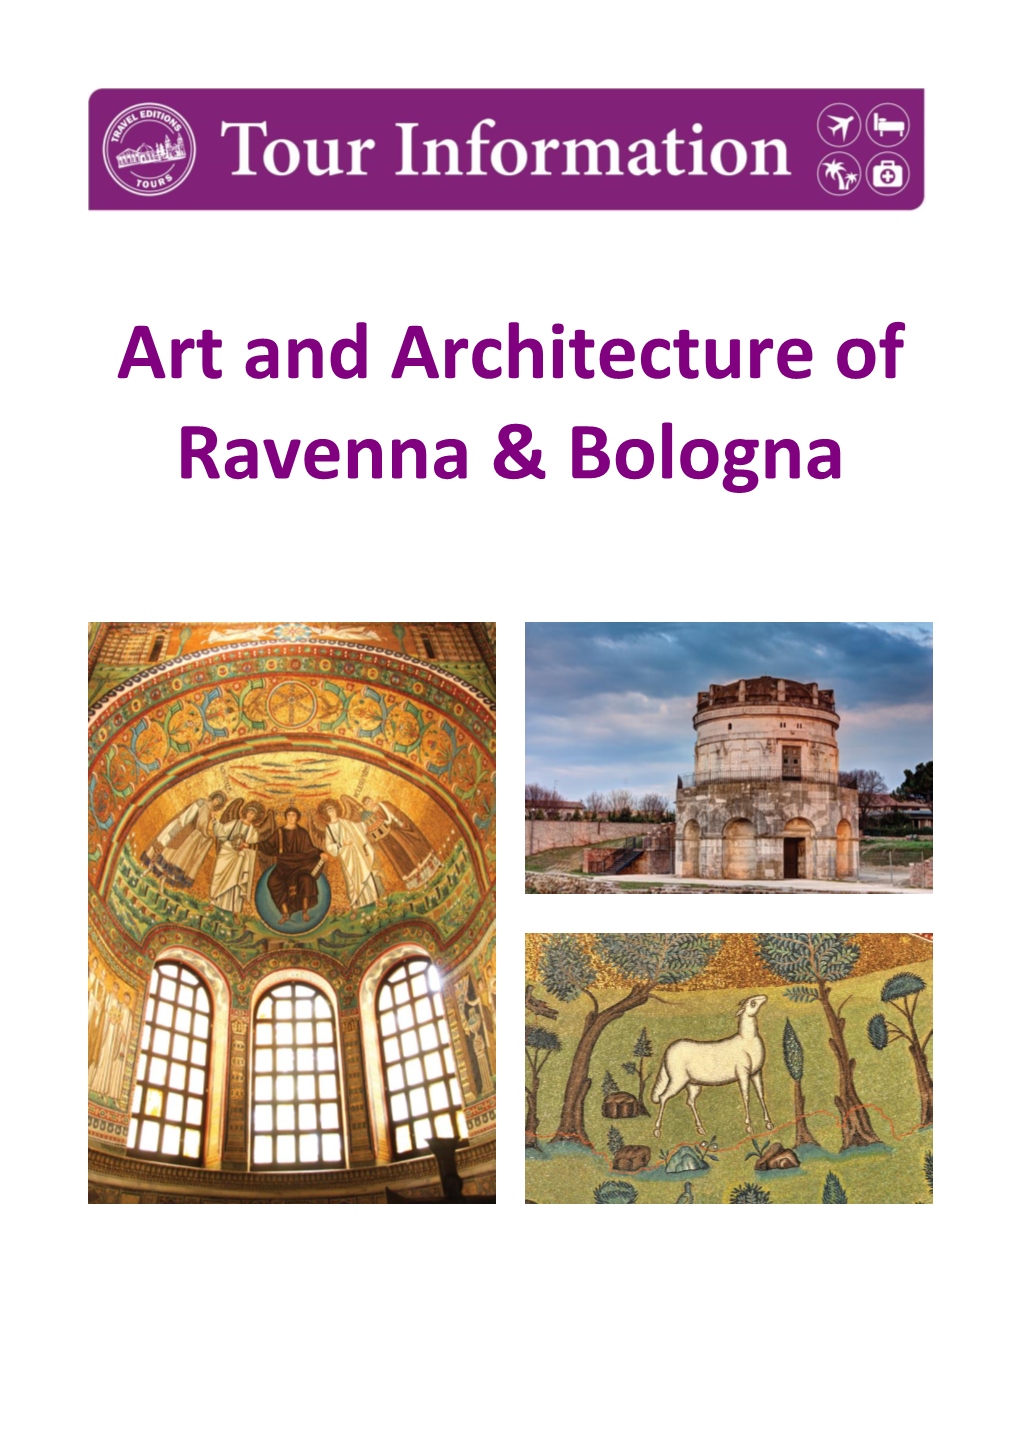 Art and Architecture of Ravenna & Bologna